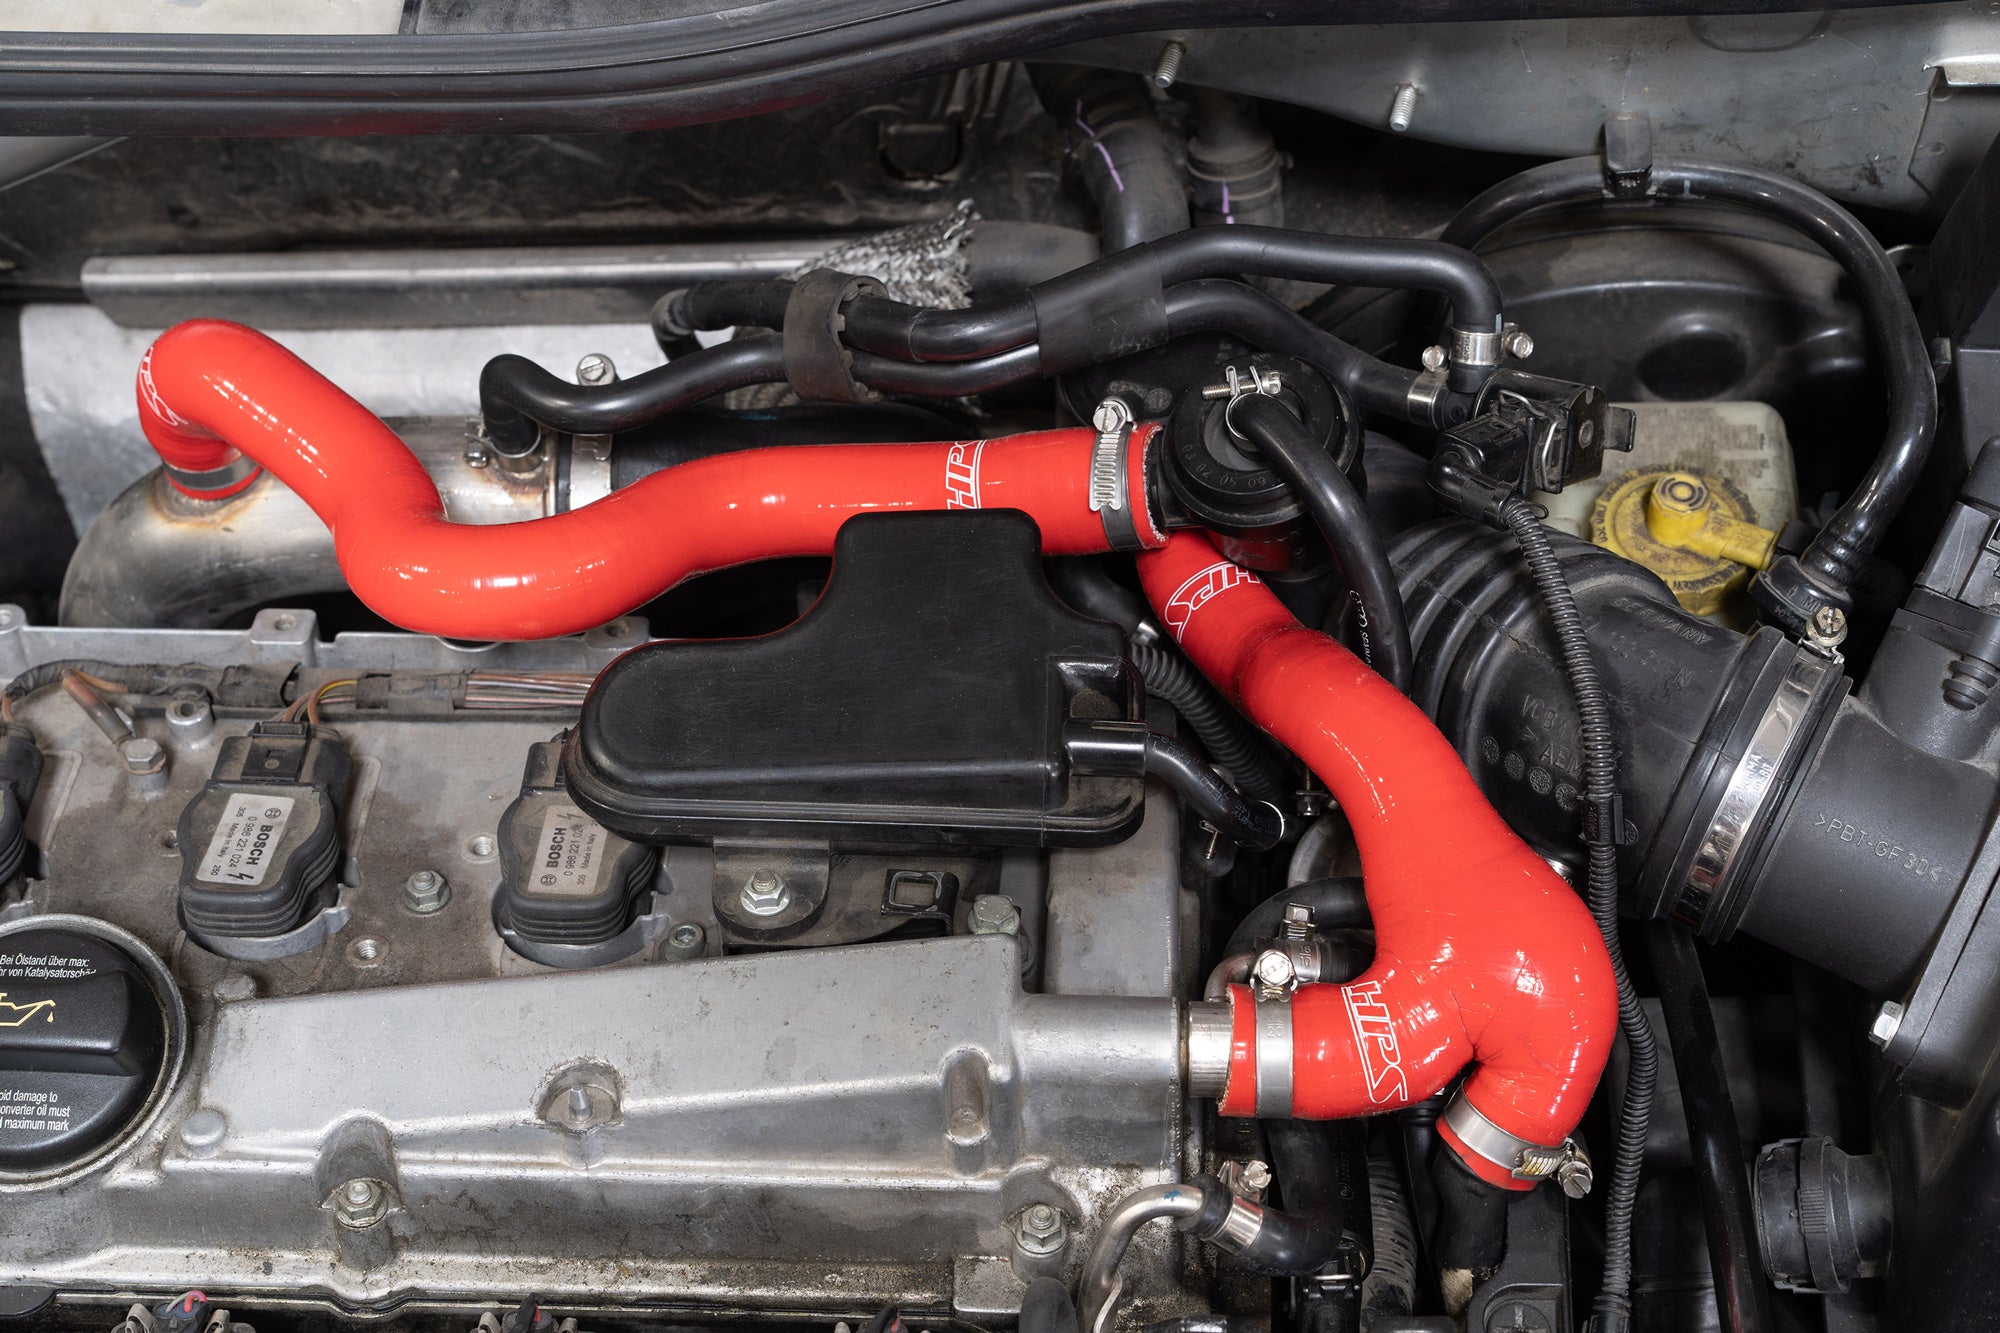 HPS Red Silicone Breather Hose Valve Cover Tube Installed VW Golf MK4 1.8T Turbo Late AWP 57-1934